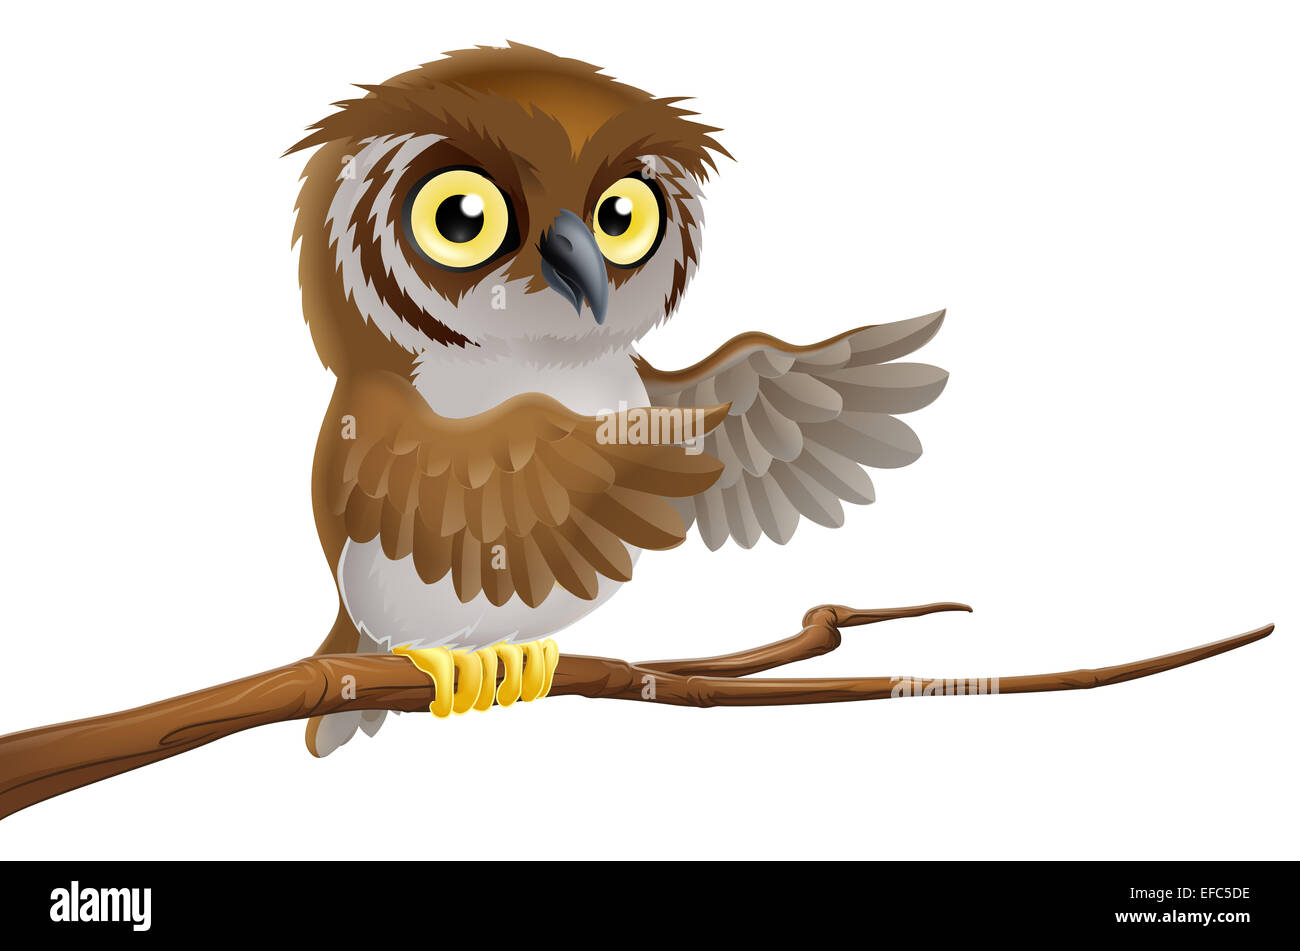 An illustration of a cartoon owl on a tree branch pointing with its wing Stock Photo